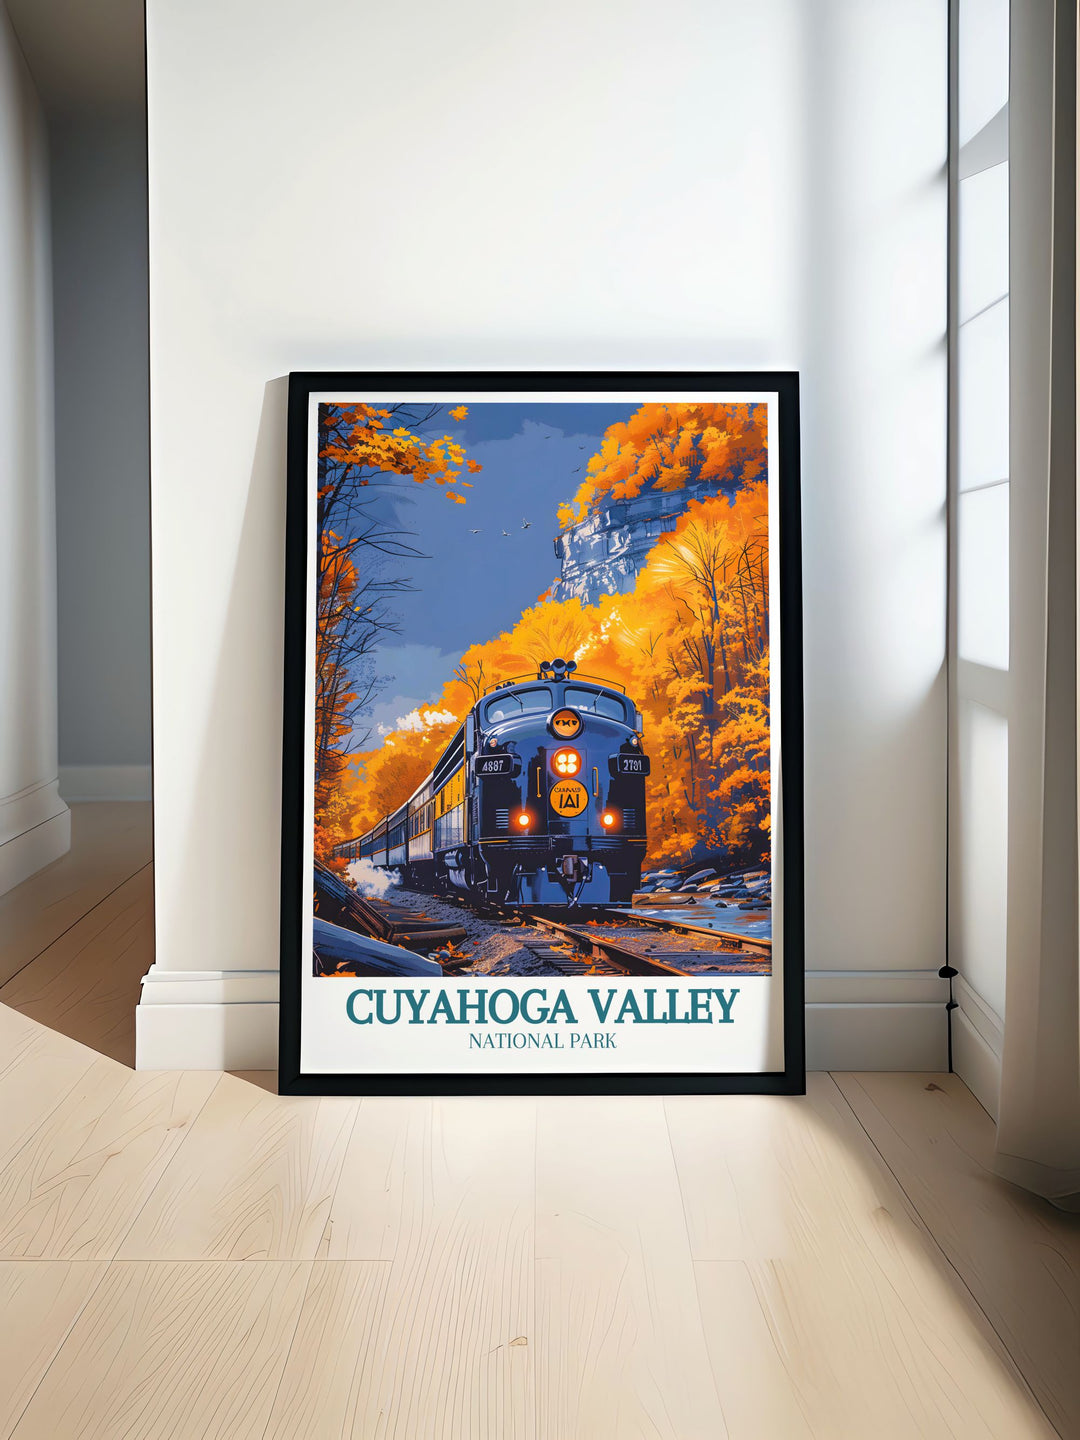 High quality art print of Cuyahoga Valley National Park, showcasing its lush greenery and scenic landscapes. Ideal for home decor or as a gift for nature enthusiasts who appreciate the beauty of Ohios national parks.